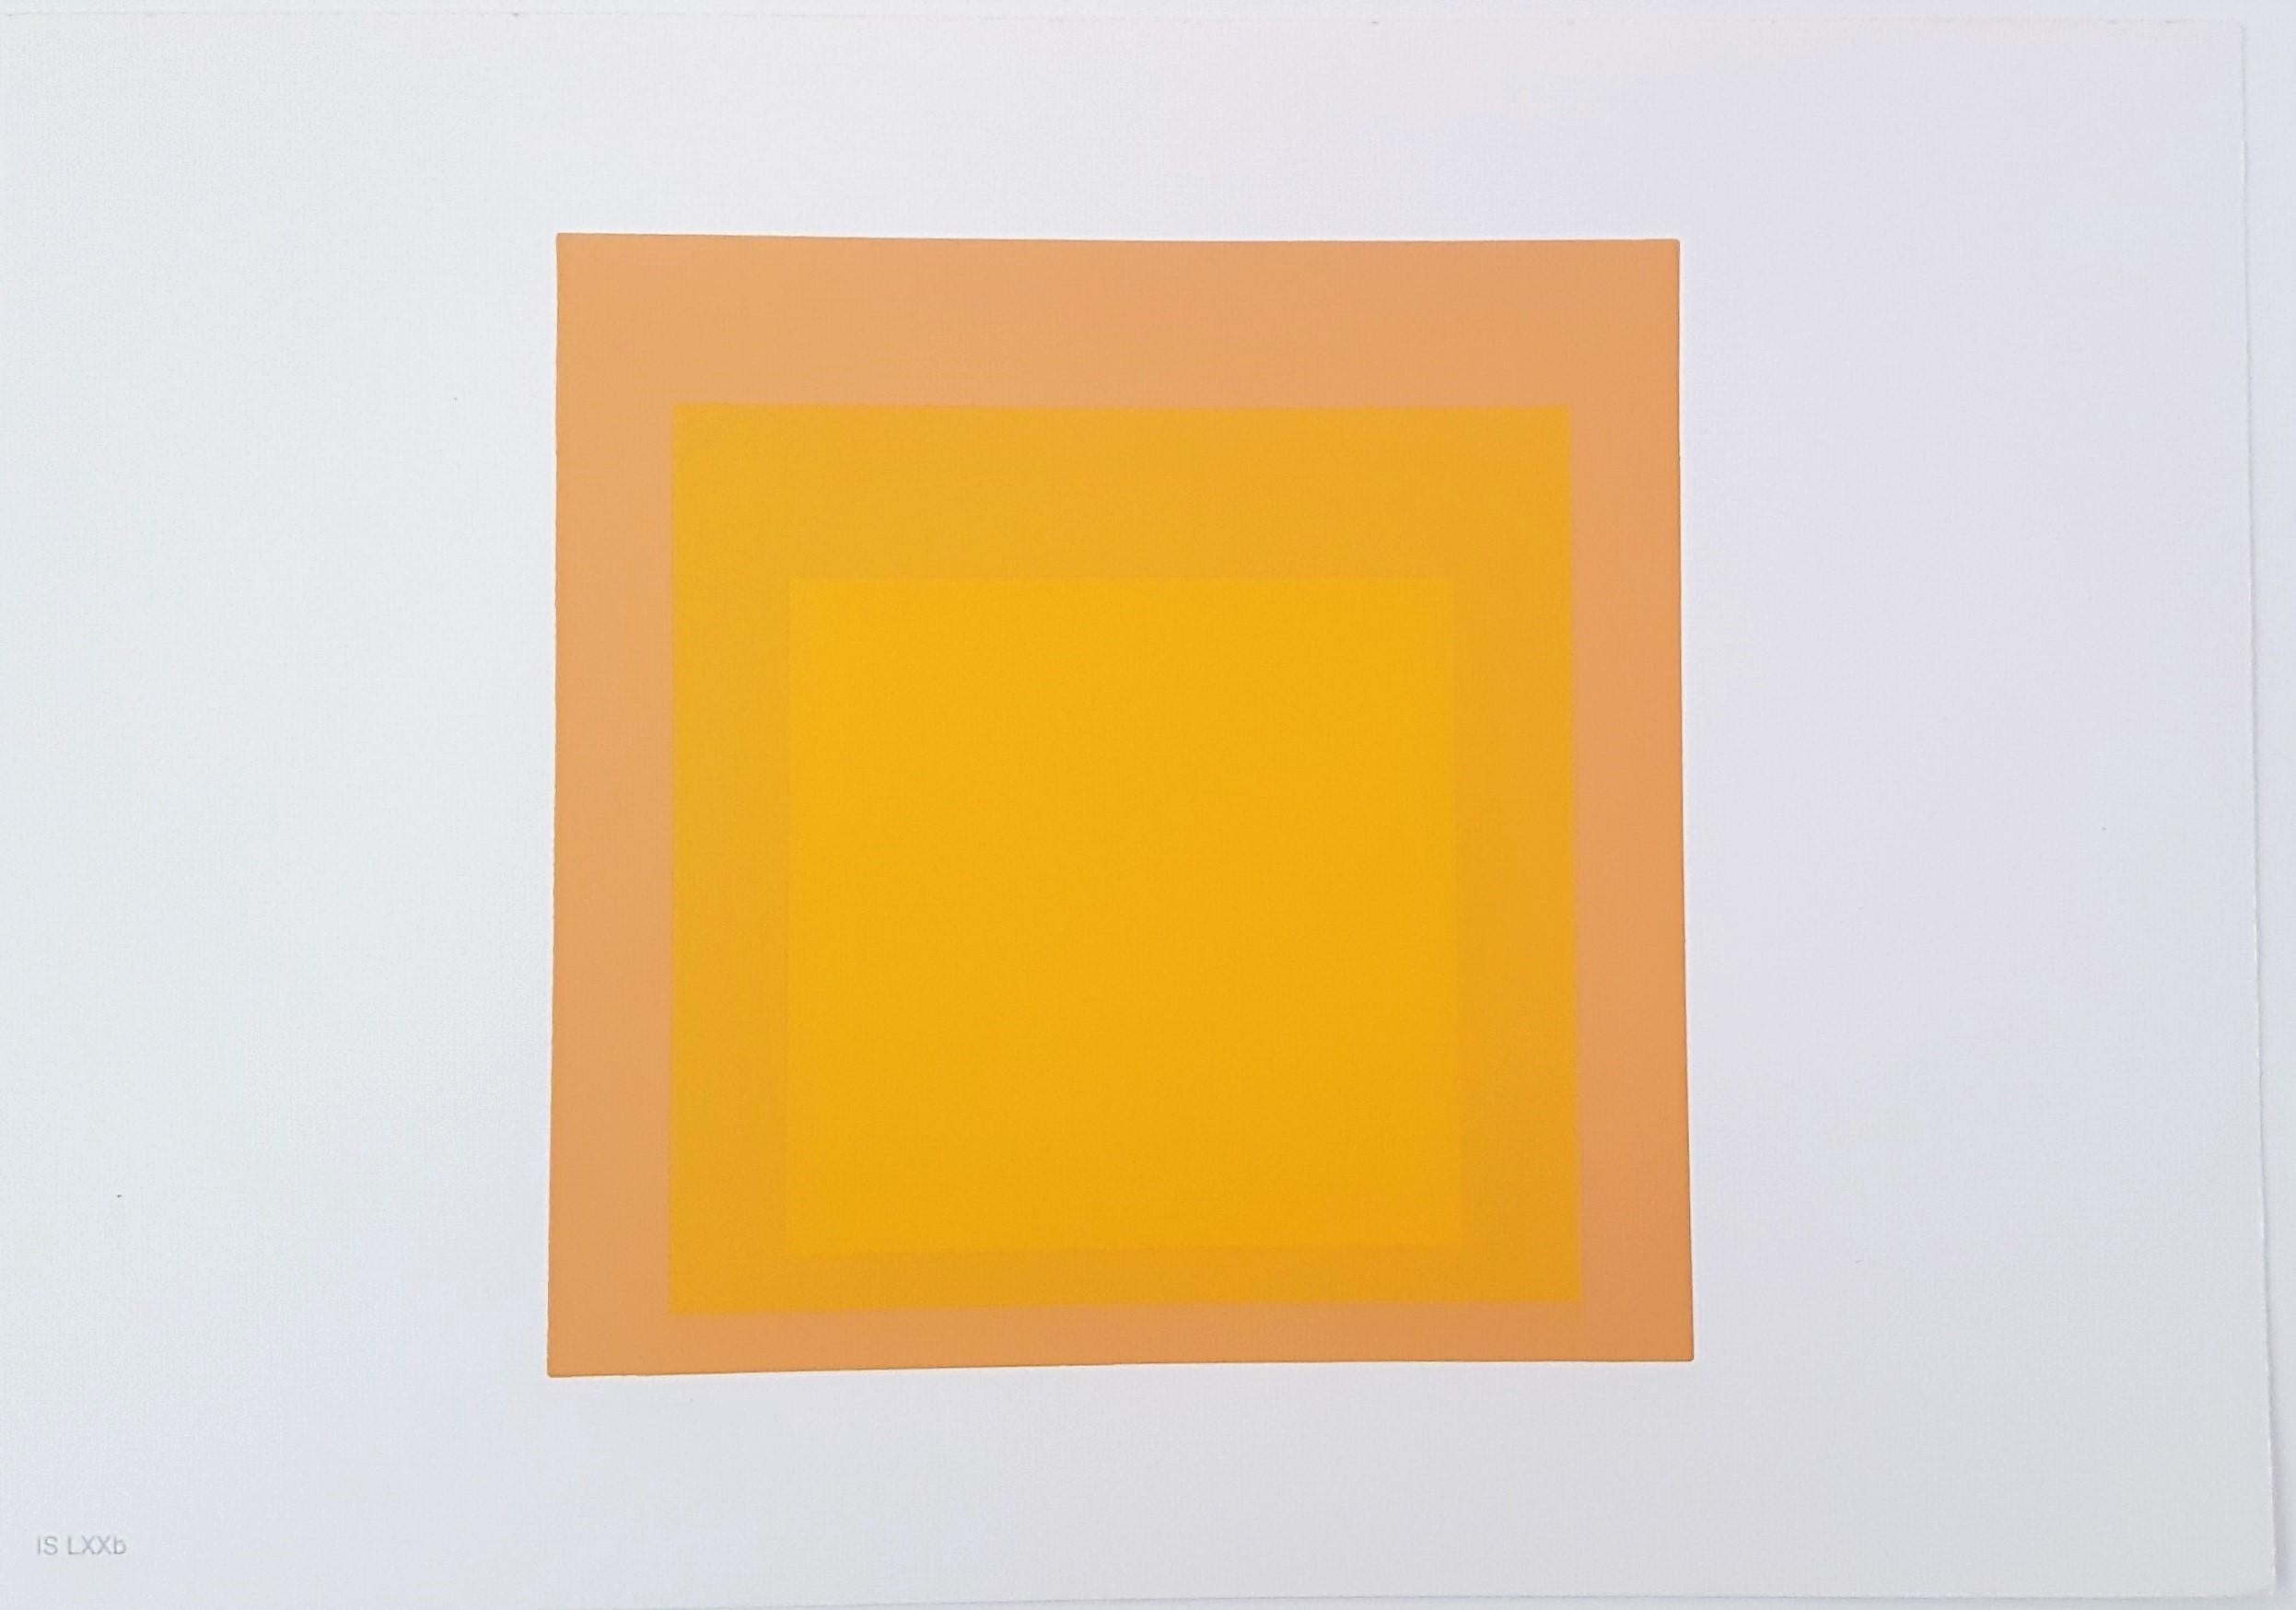 (after) Josef Albers Abstract Print – Homage to the Square (I-S, LXXb)